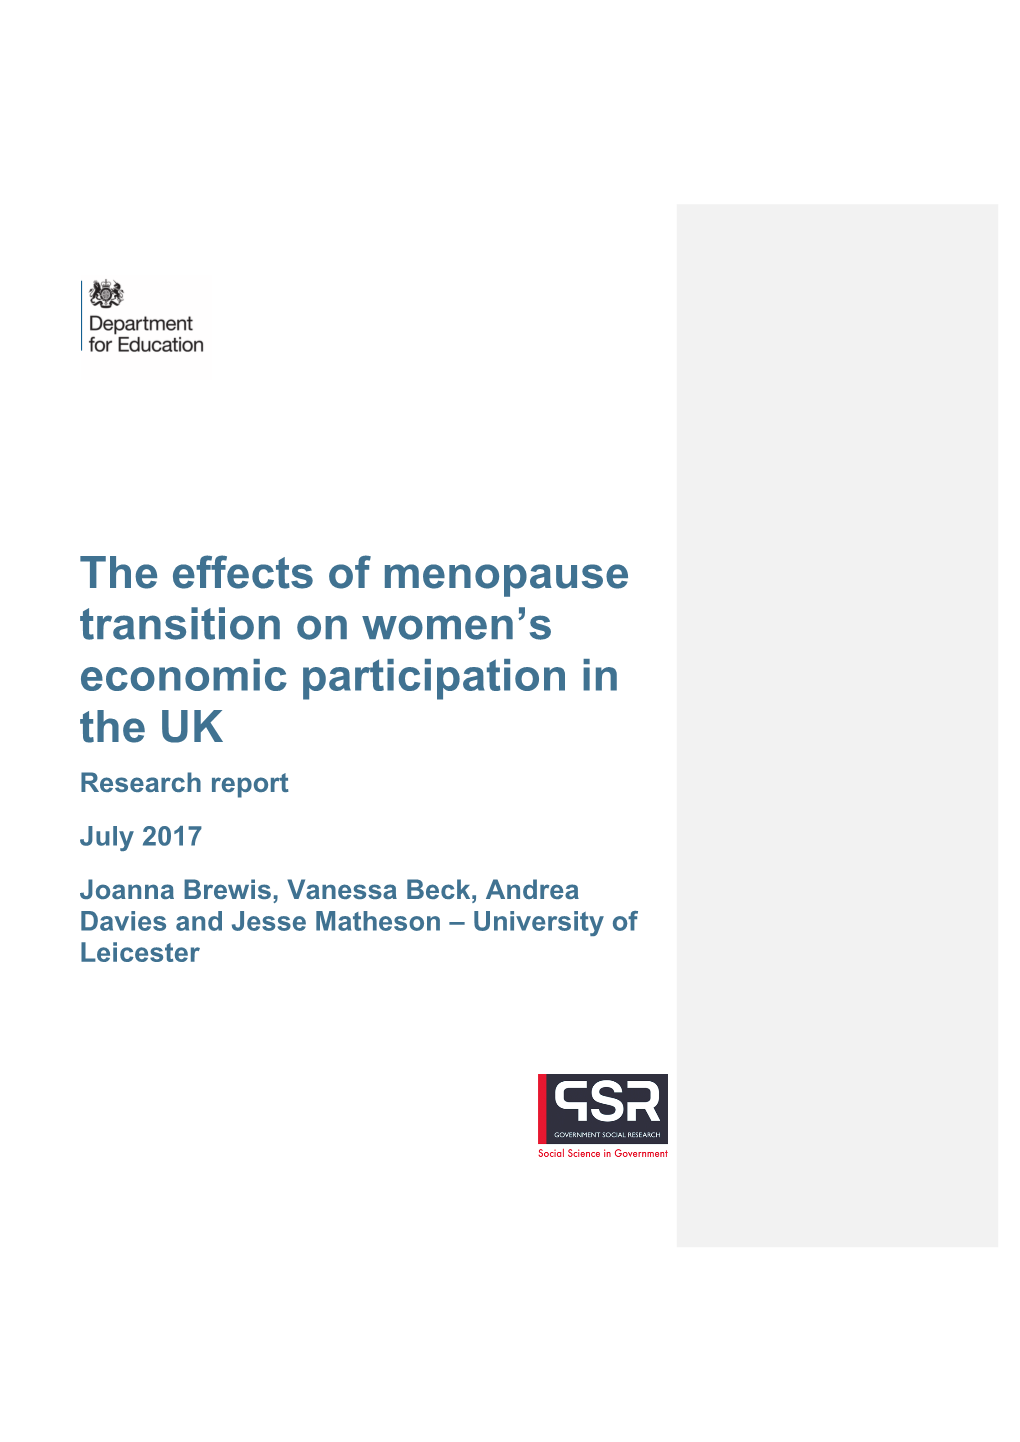 The Effects of Menopause Transition on Women's Economic Participation